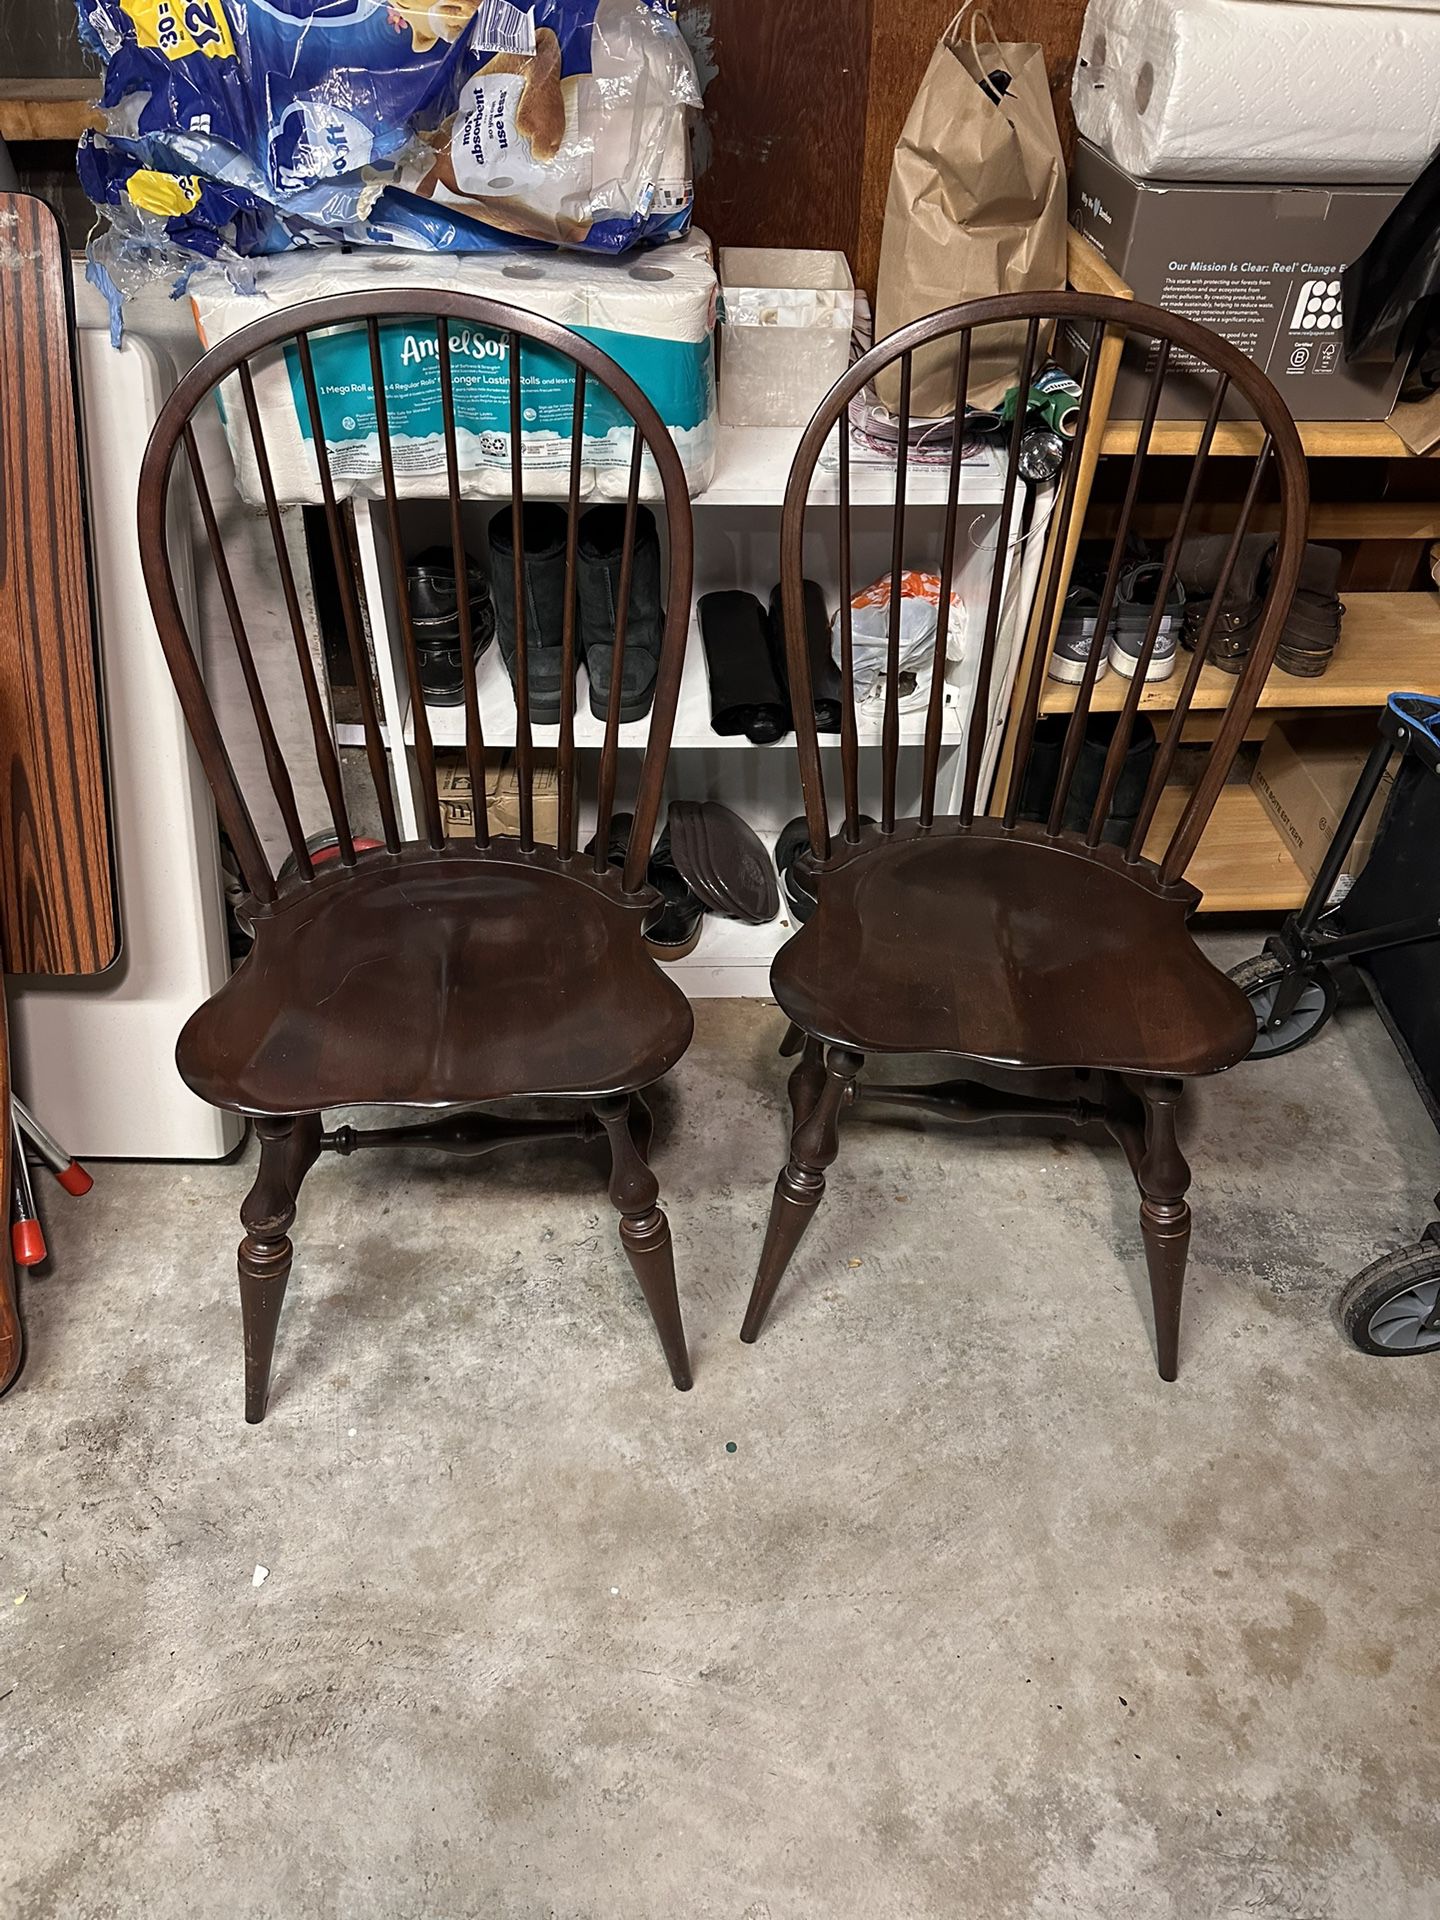 Two Wooden Chairs 